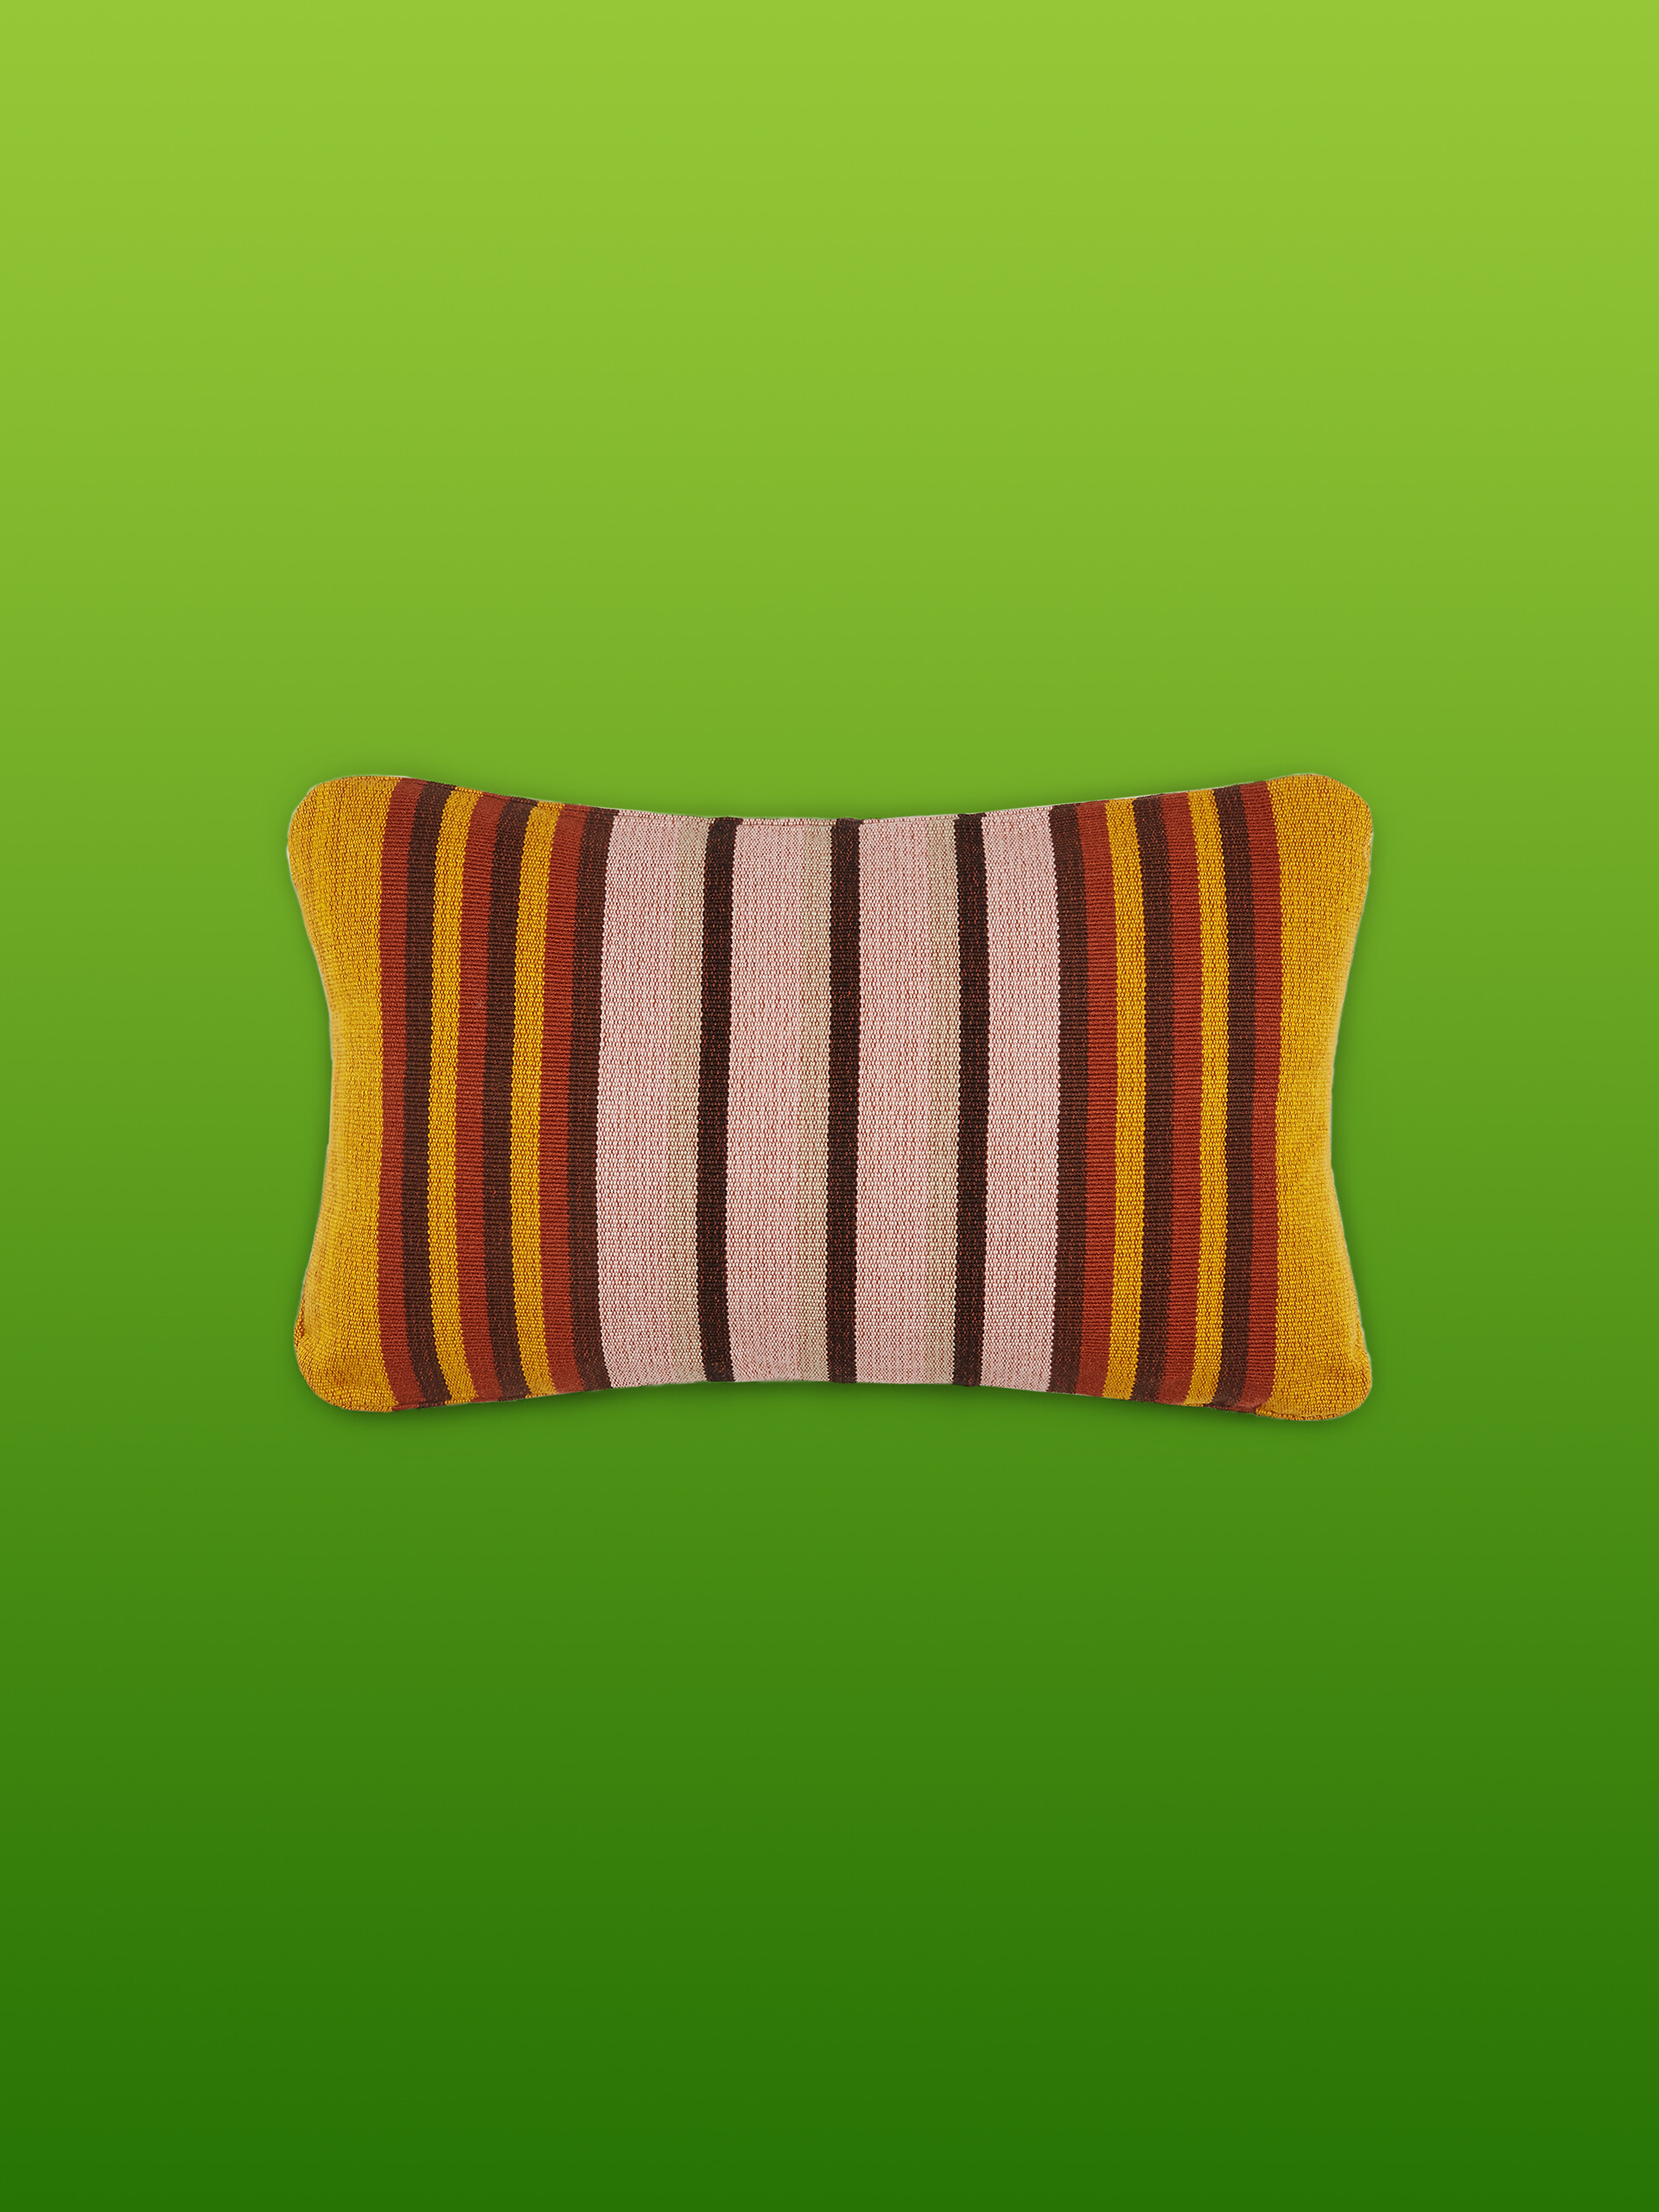 MARNI MARKET rectangular pillow cover in polyester with yellow pink and brown vertical stripes - Furniture - Image 1